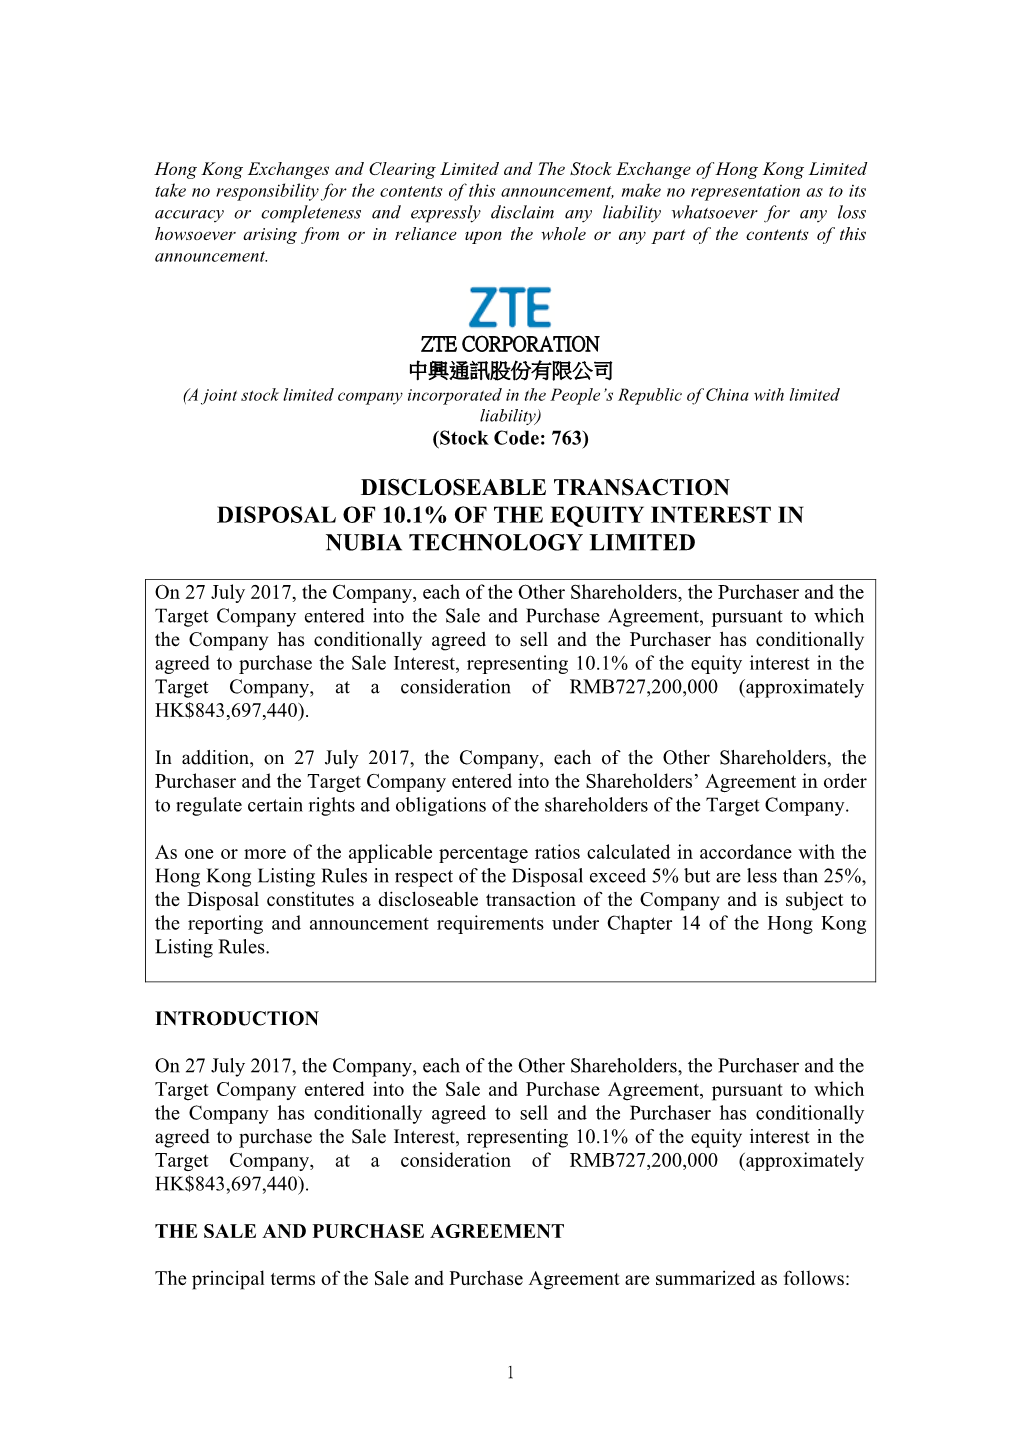 Discloseable Transaction Disposal of 10.1% of the Equity Interest in Nubia Technology Limited